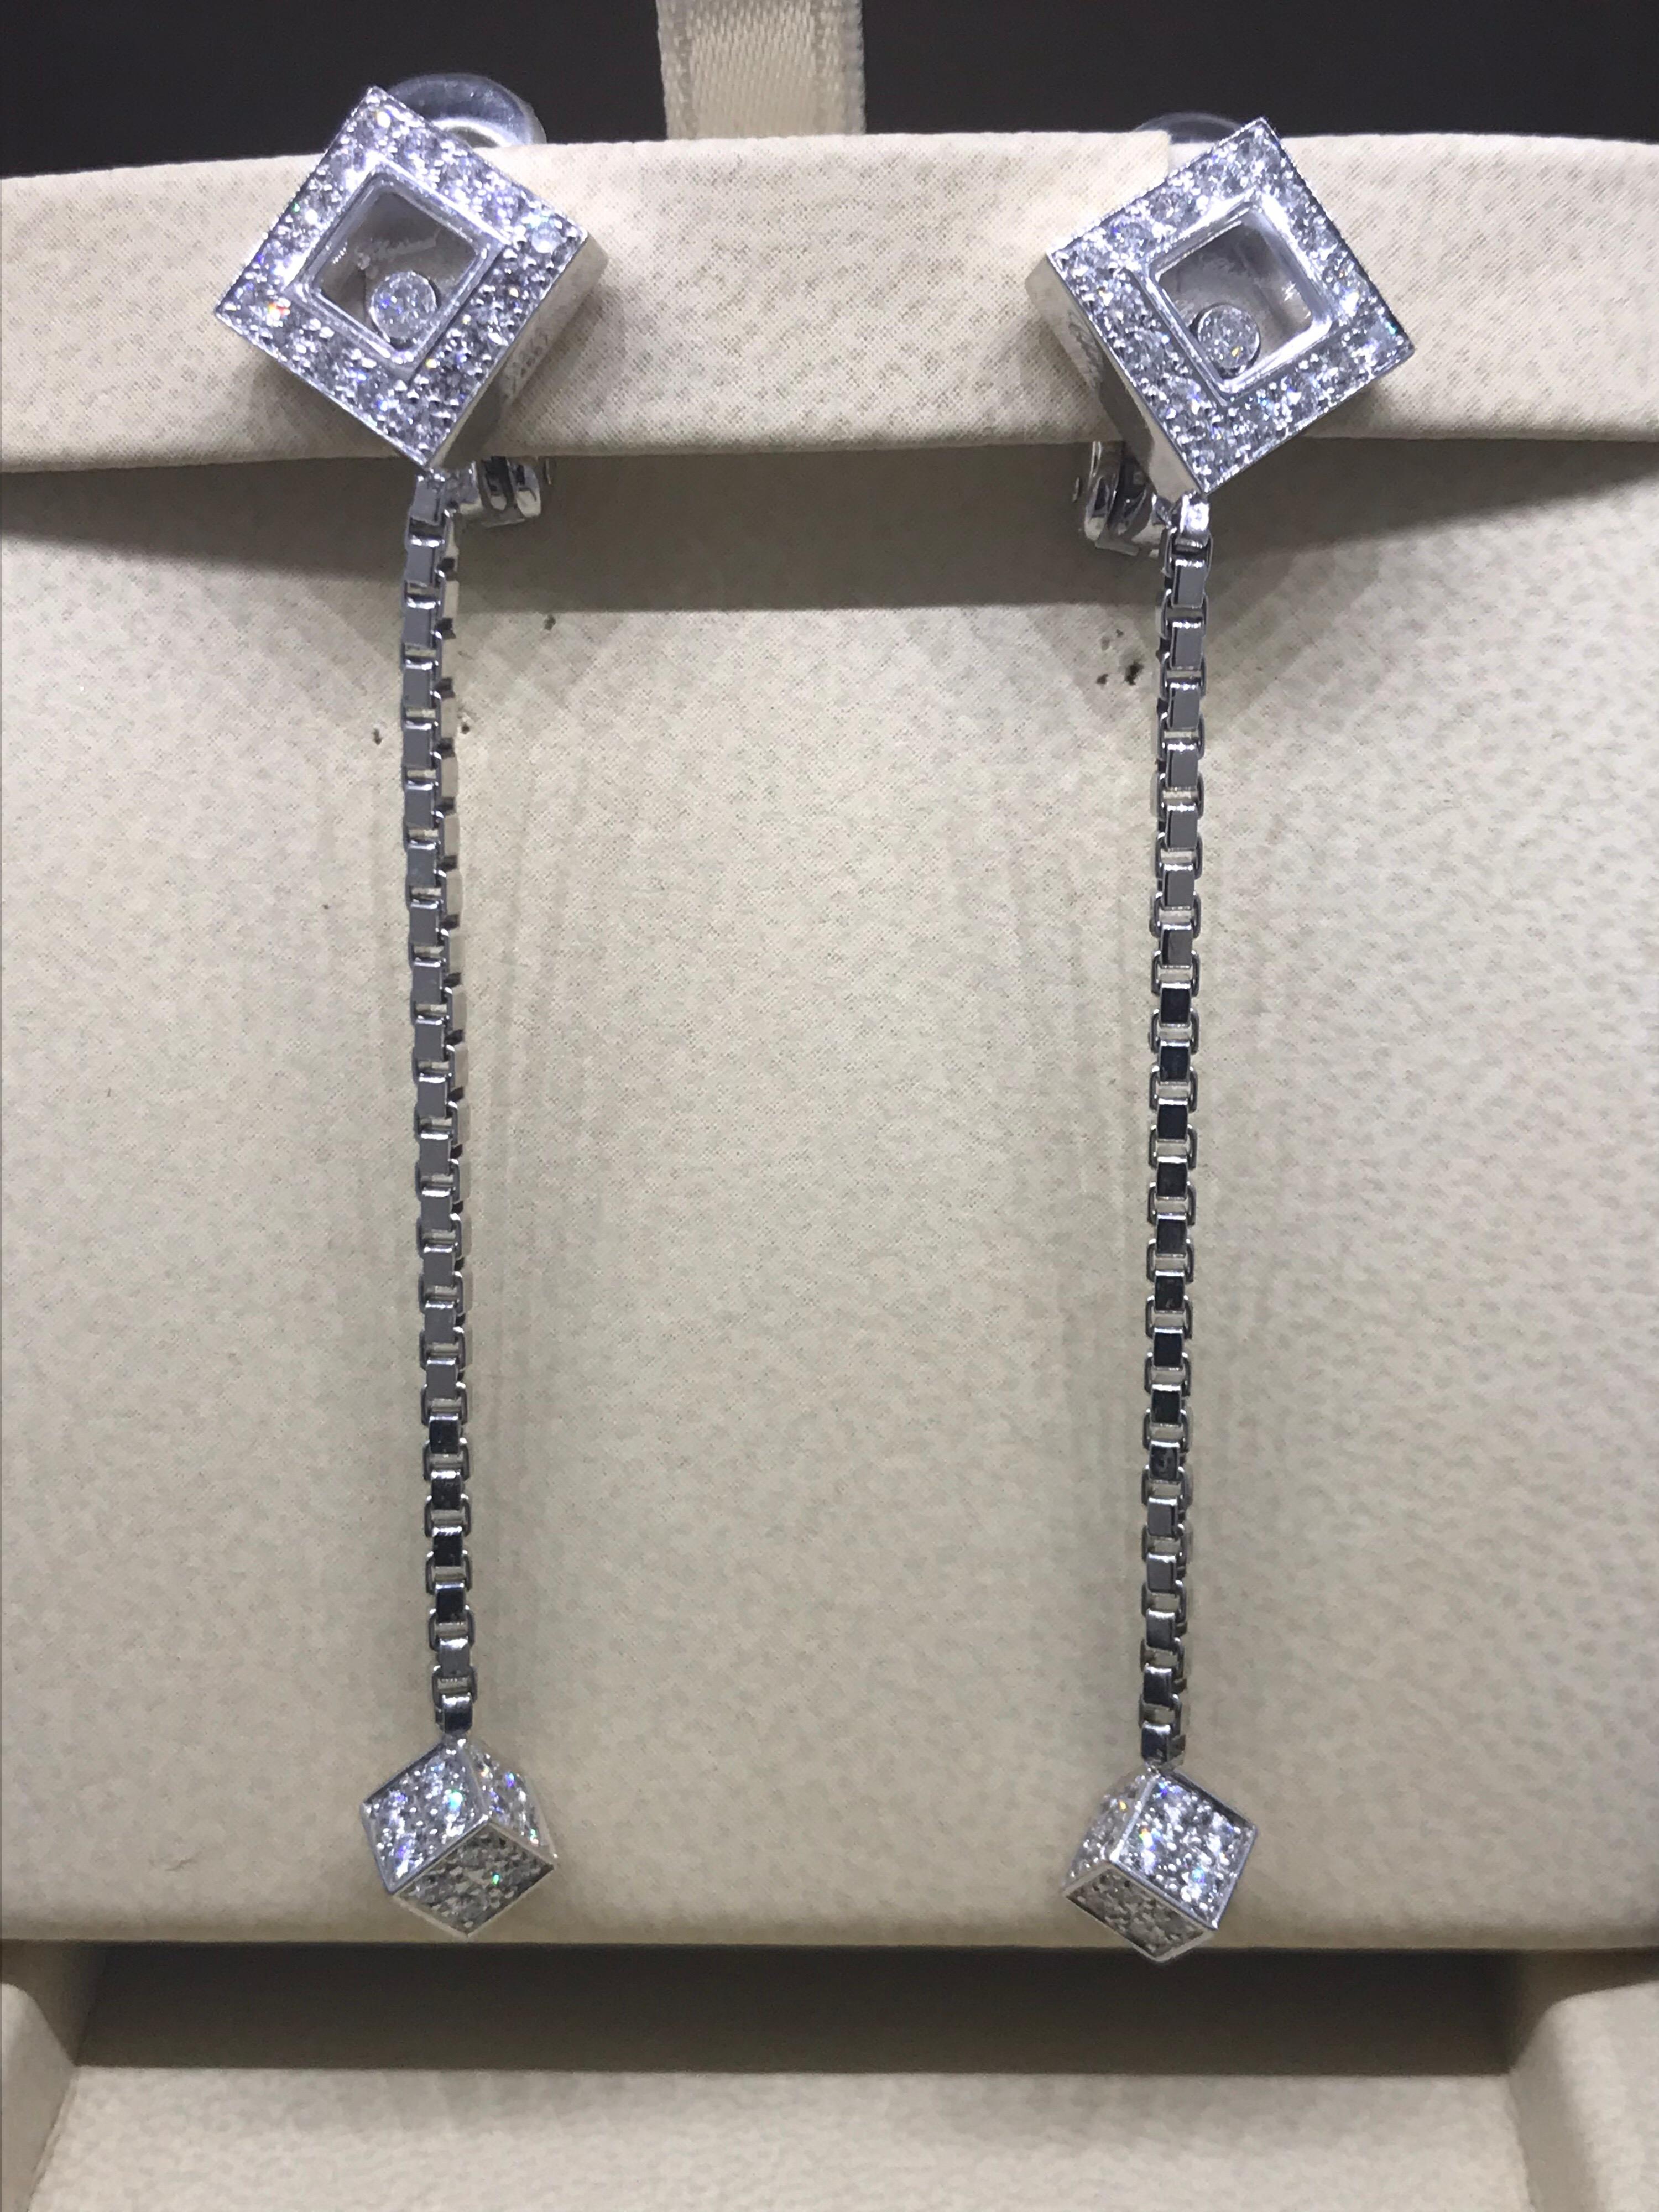 Chopard Happy Diamonds Square Earrings

Model  Number: 84/4667-1001

100% Authentic

New / Old Stock

Comes with original Chopard box, certificate of authenticity and warranty, and jewels manual

18 Karat White Gold

80 Diamonds on the earrings